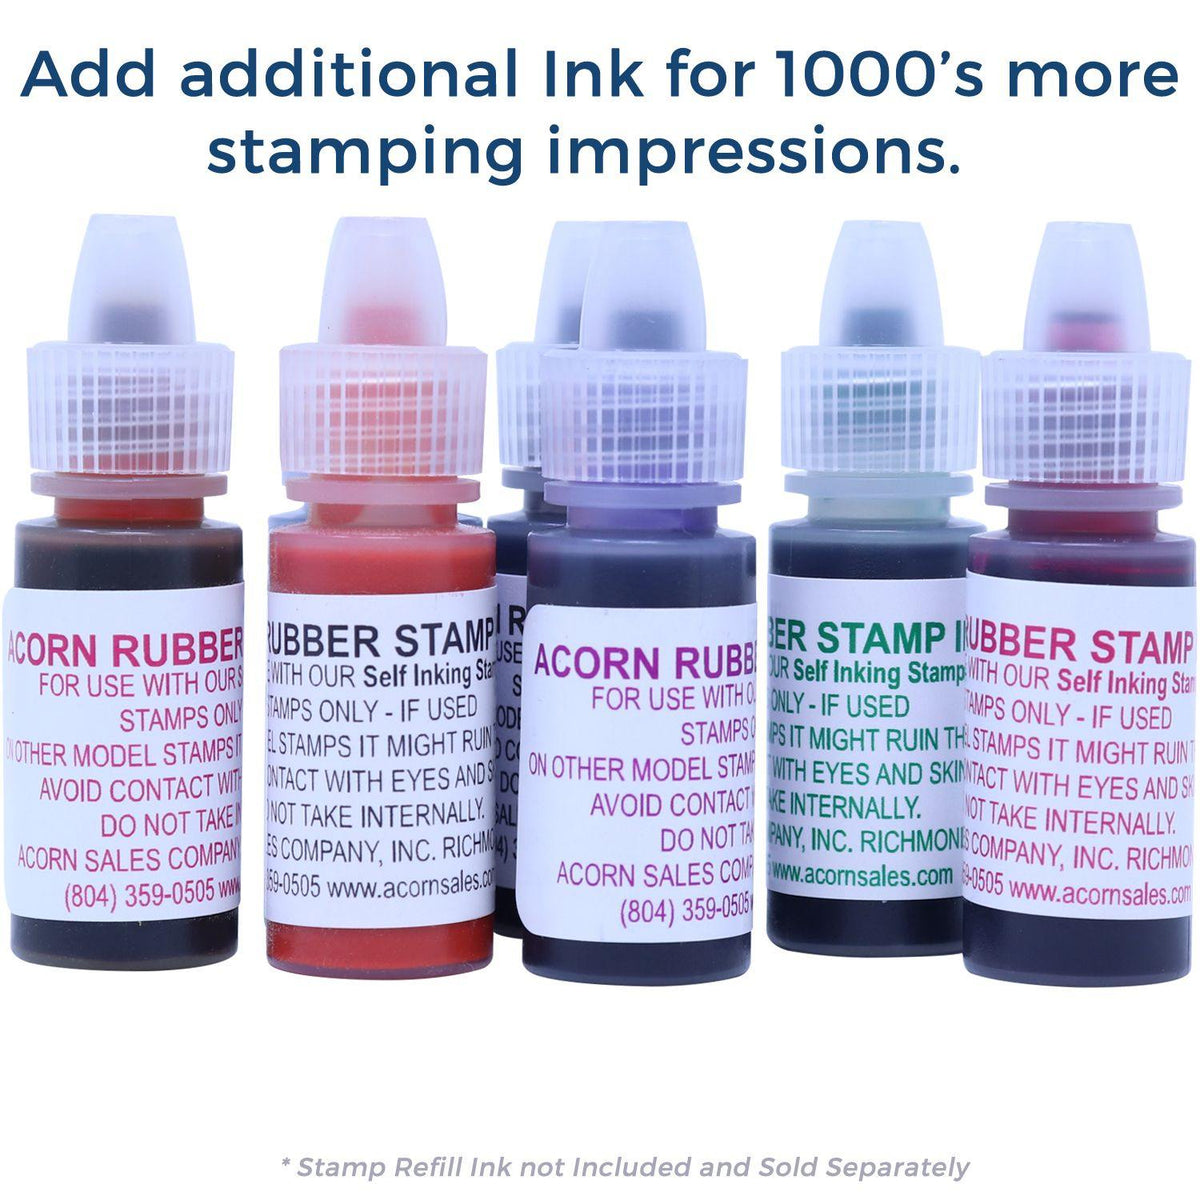 Refill Inks for Large Pre-Inked Barcode Confidential Stamp Available